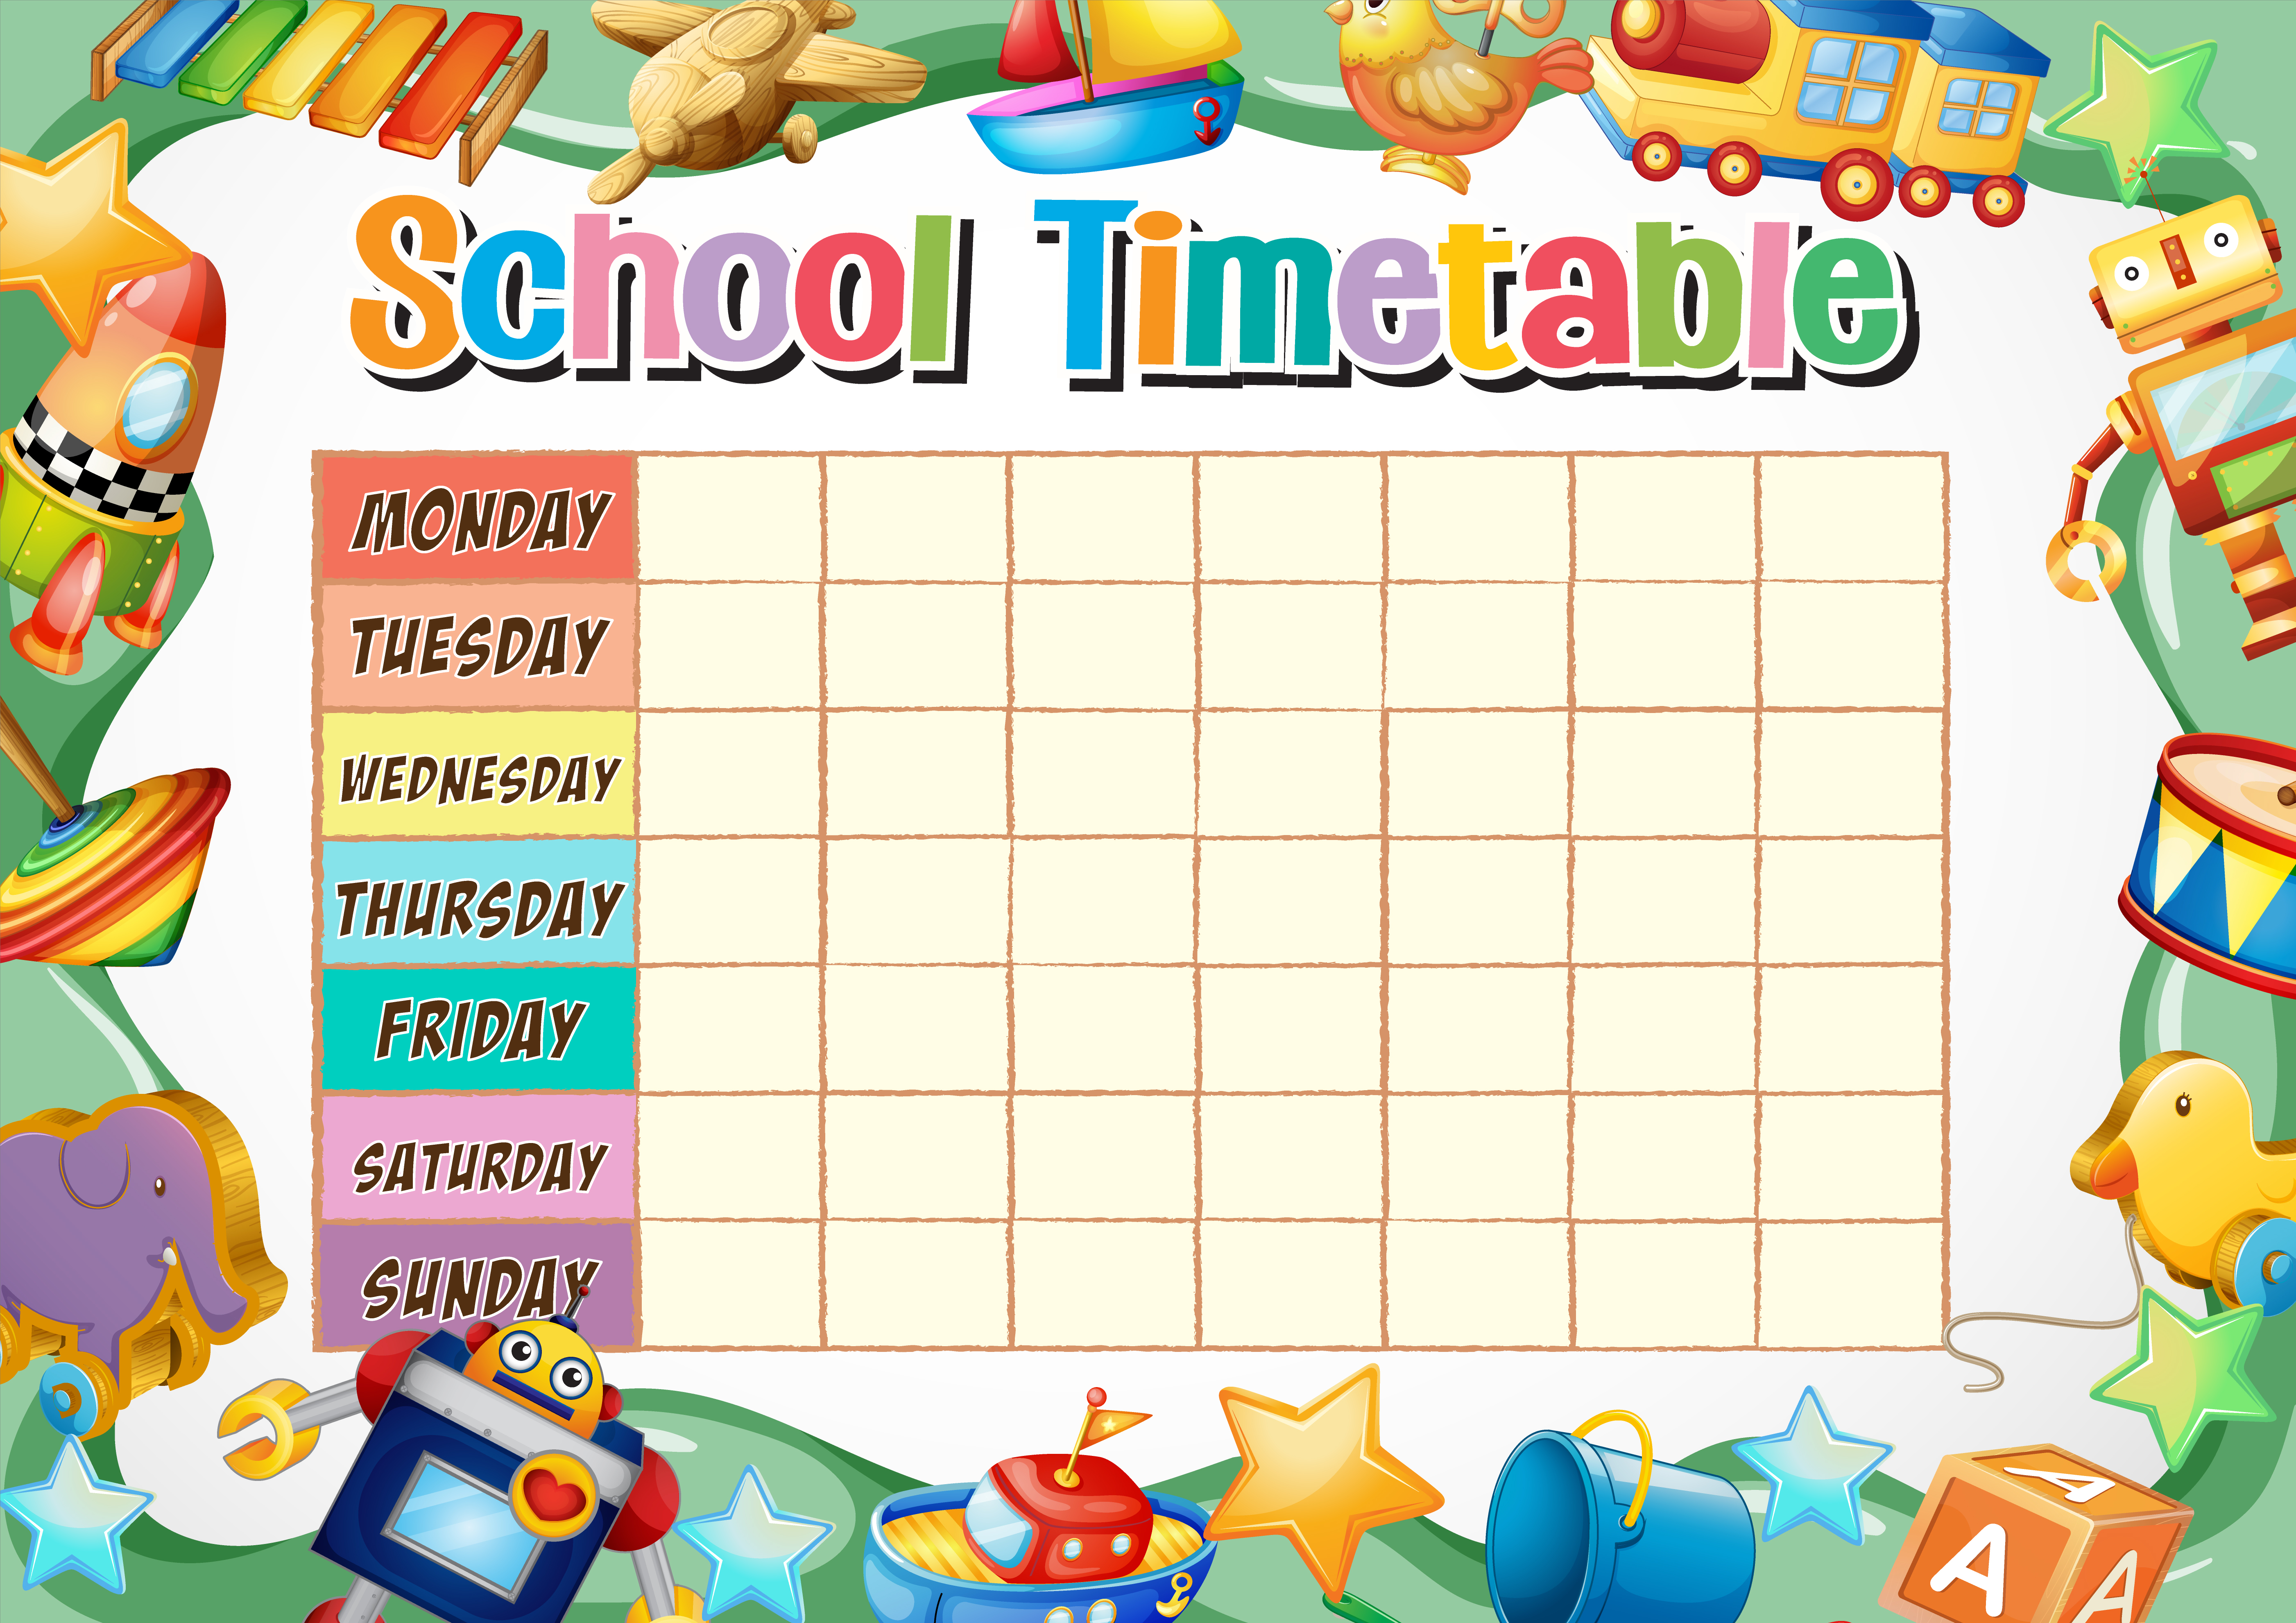 school-timetable-template-with-bees-download-free-vectors-clipart-b8c